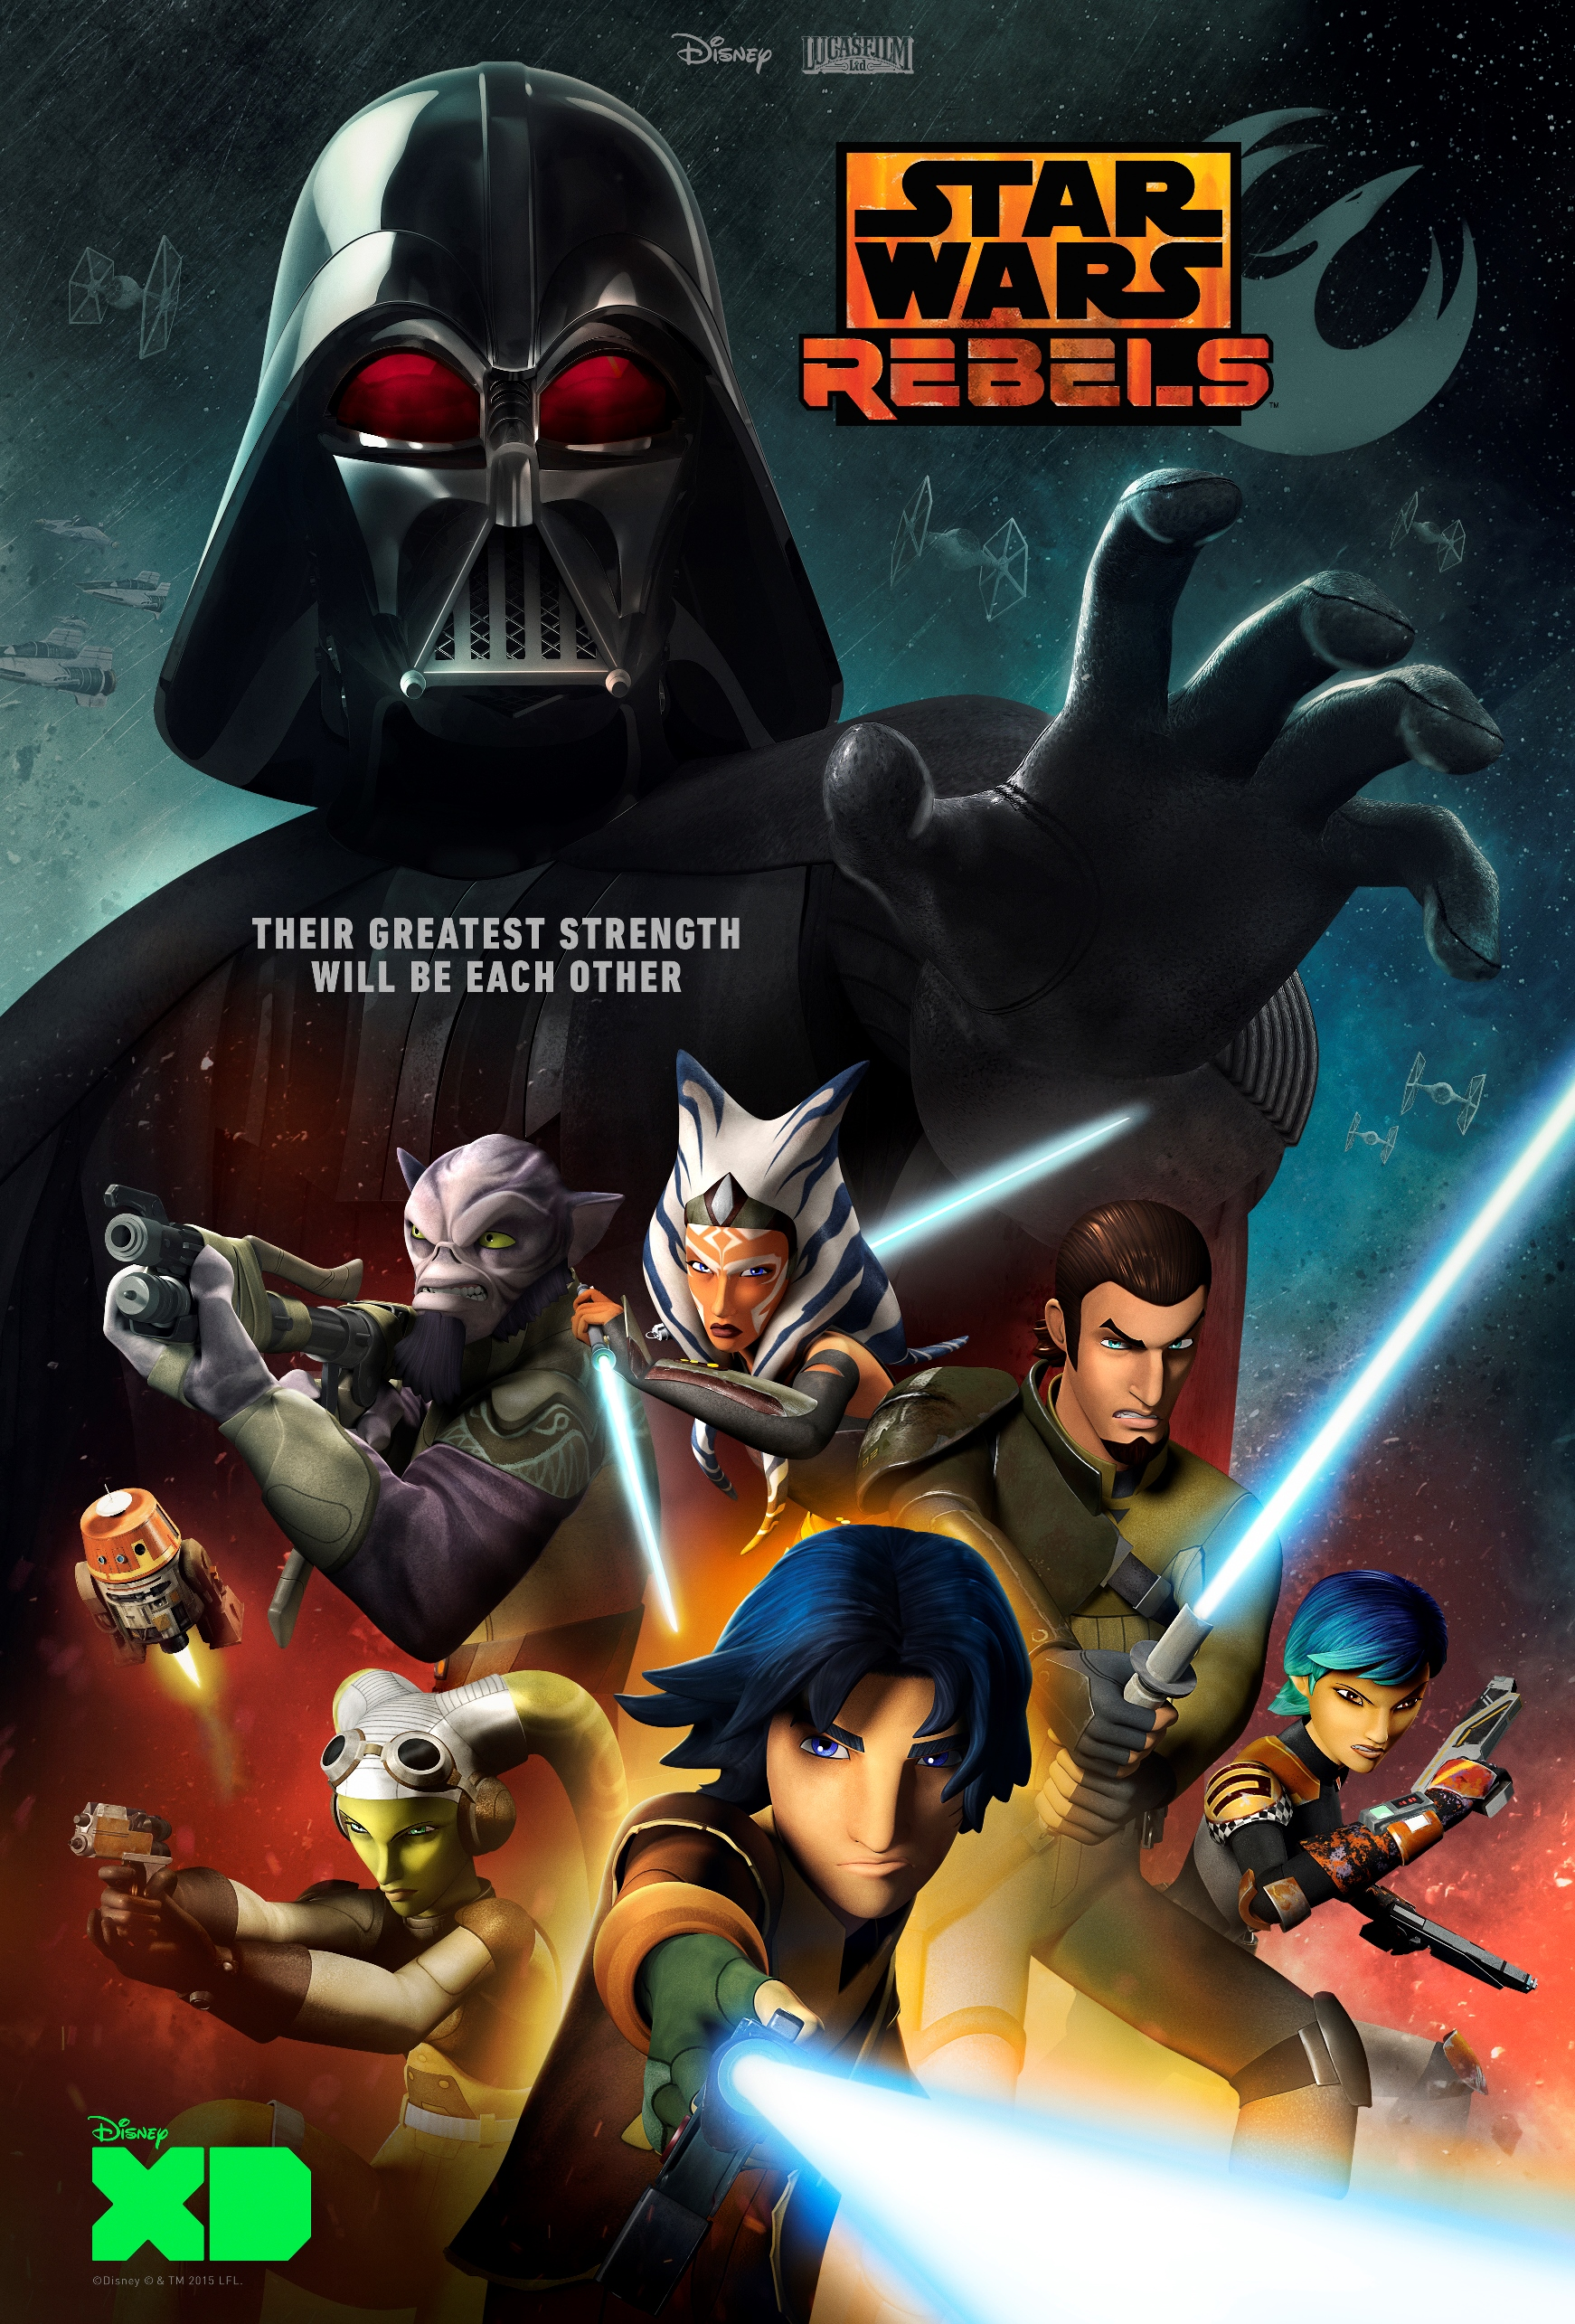 What is Star Wars Rebels season 2 about?